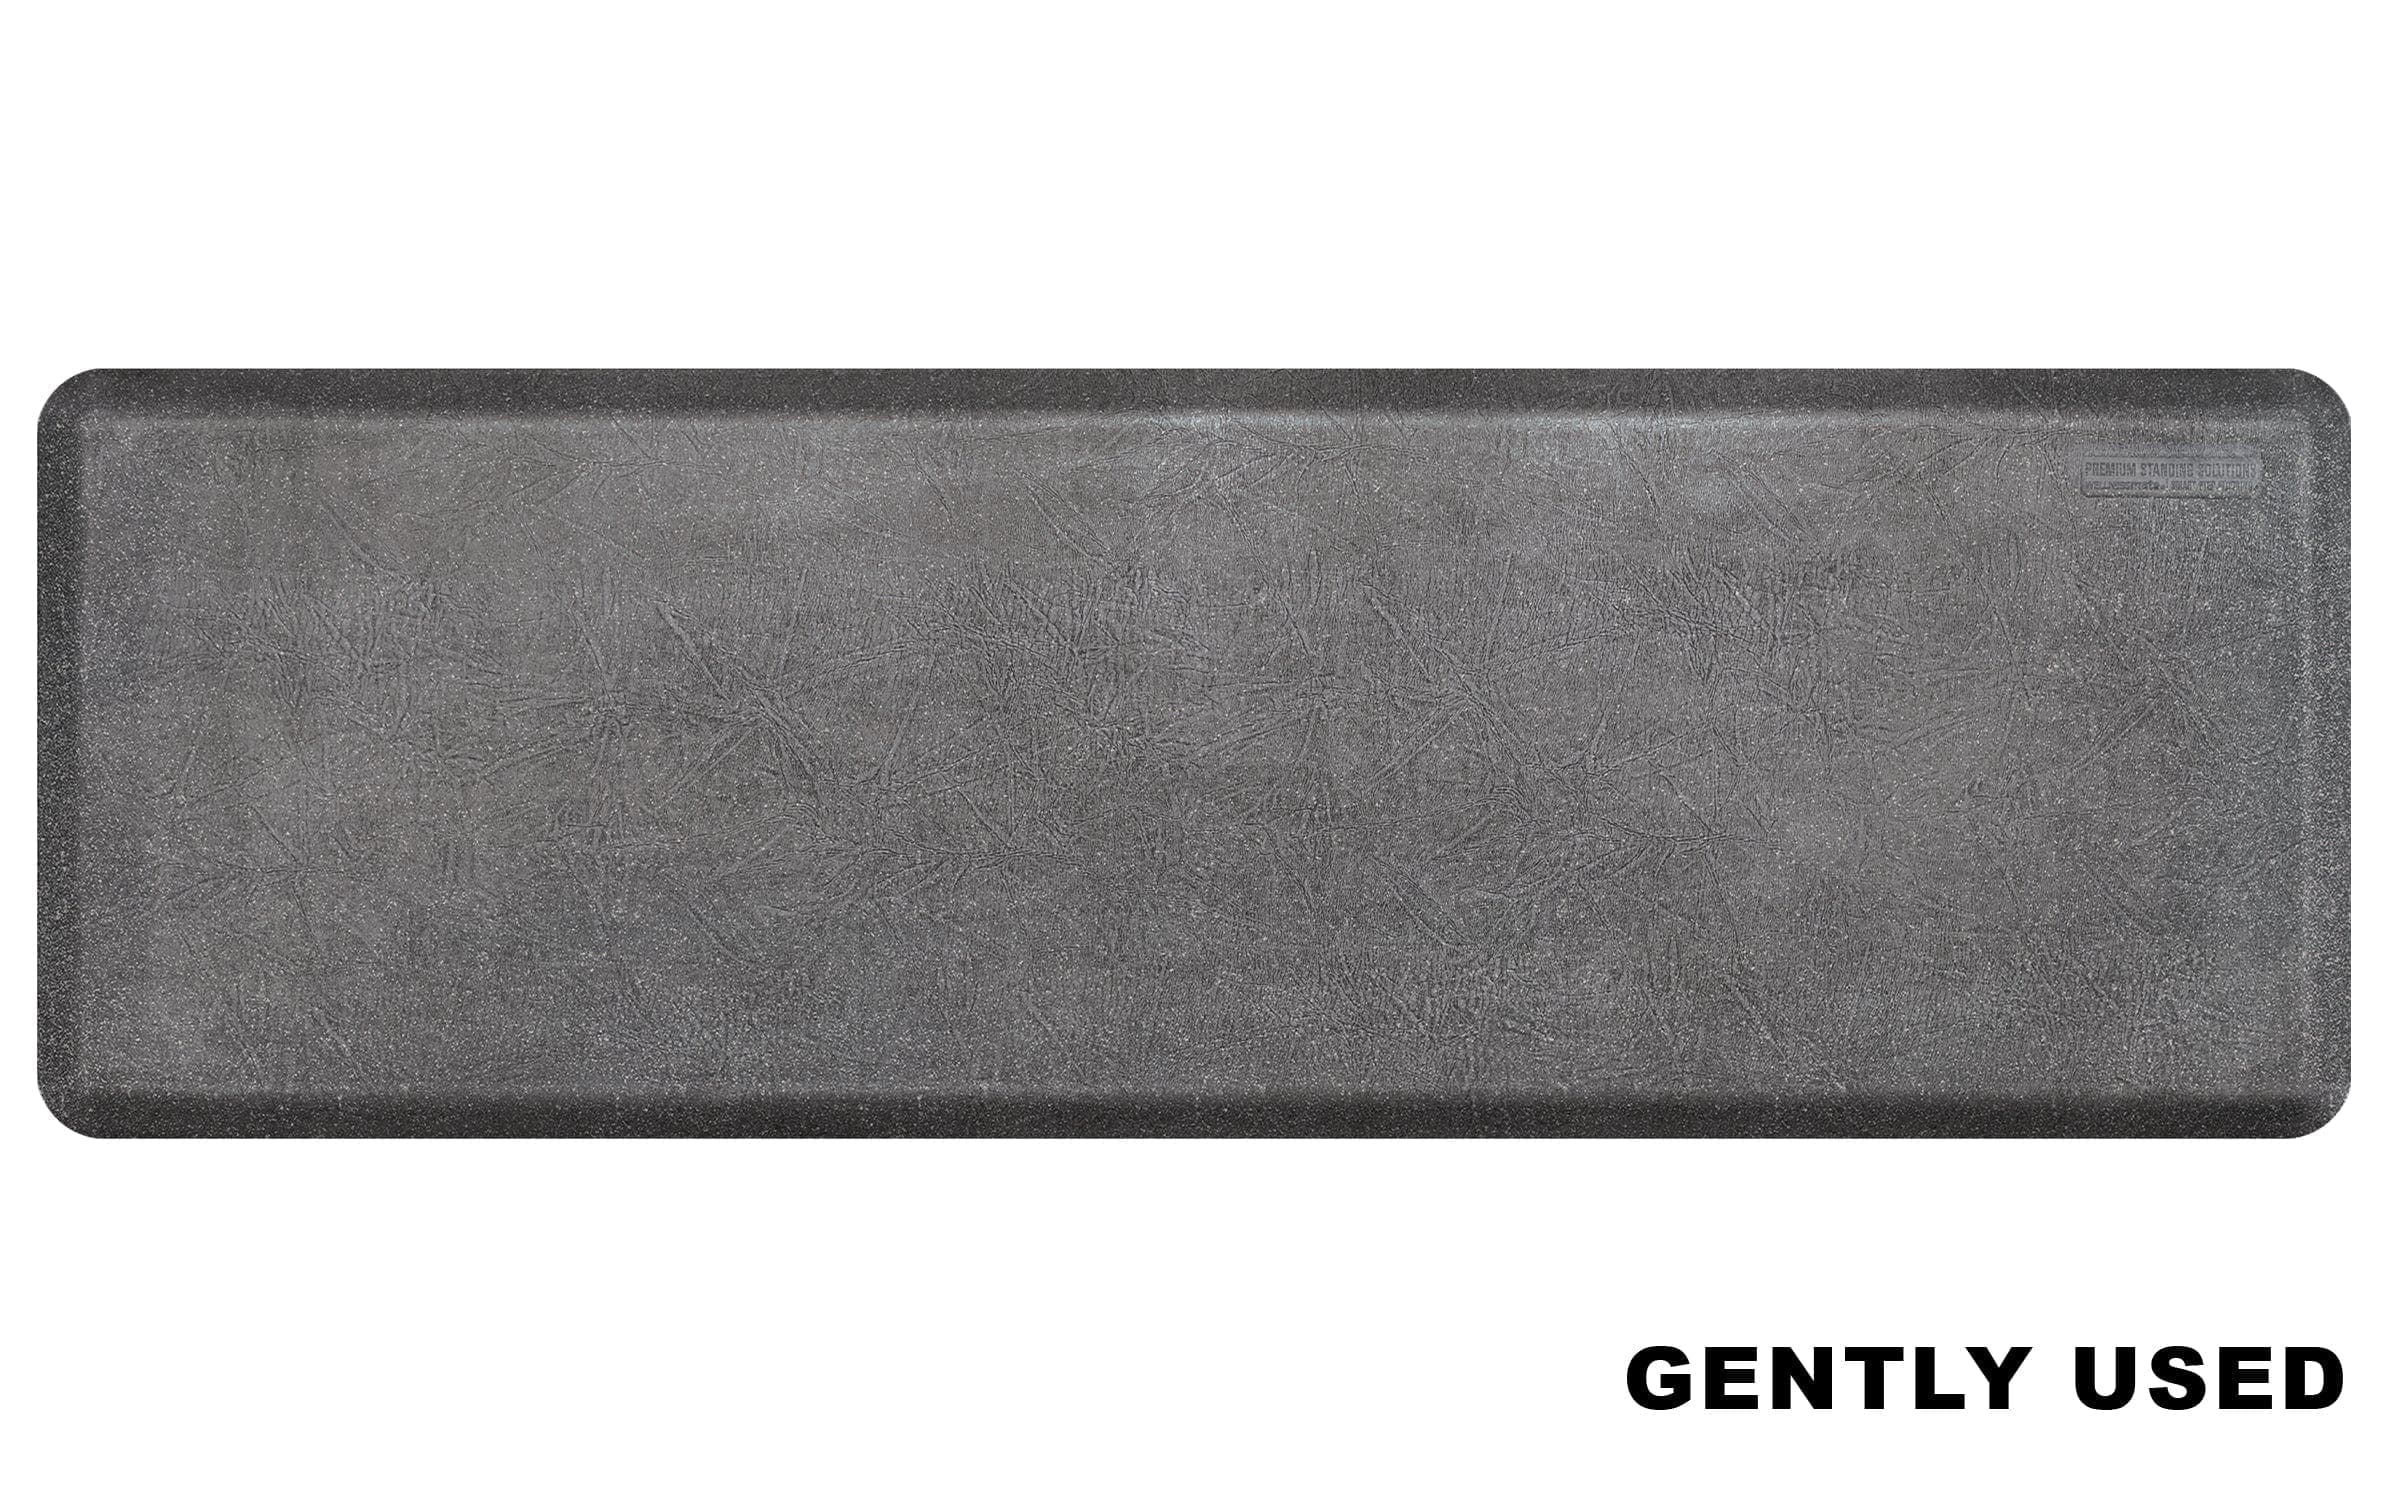 WellnessMats All WellnessMats WellnessMats 6' x 2' Vintage Leather Collection - Granite Steel